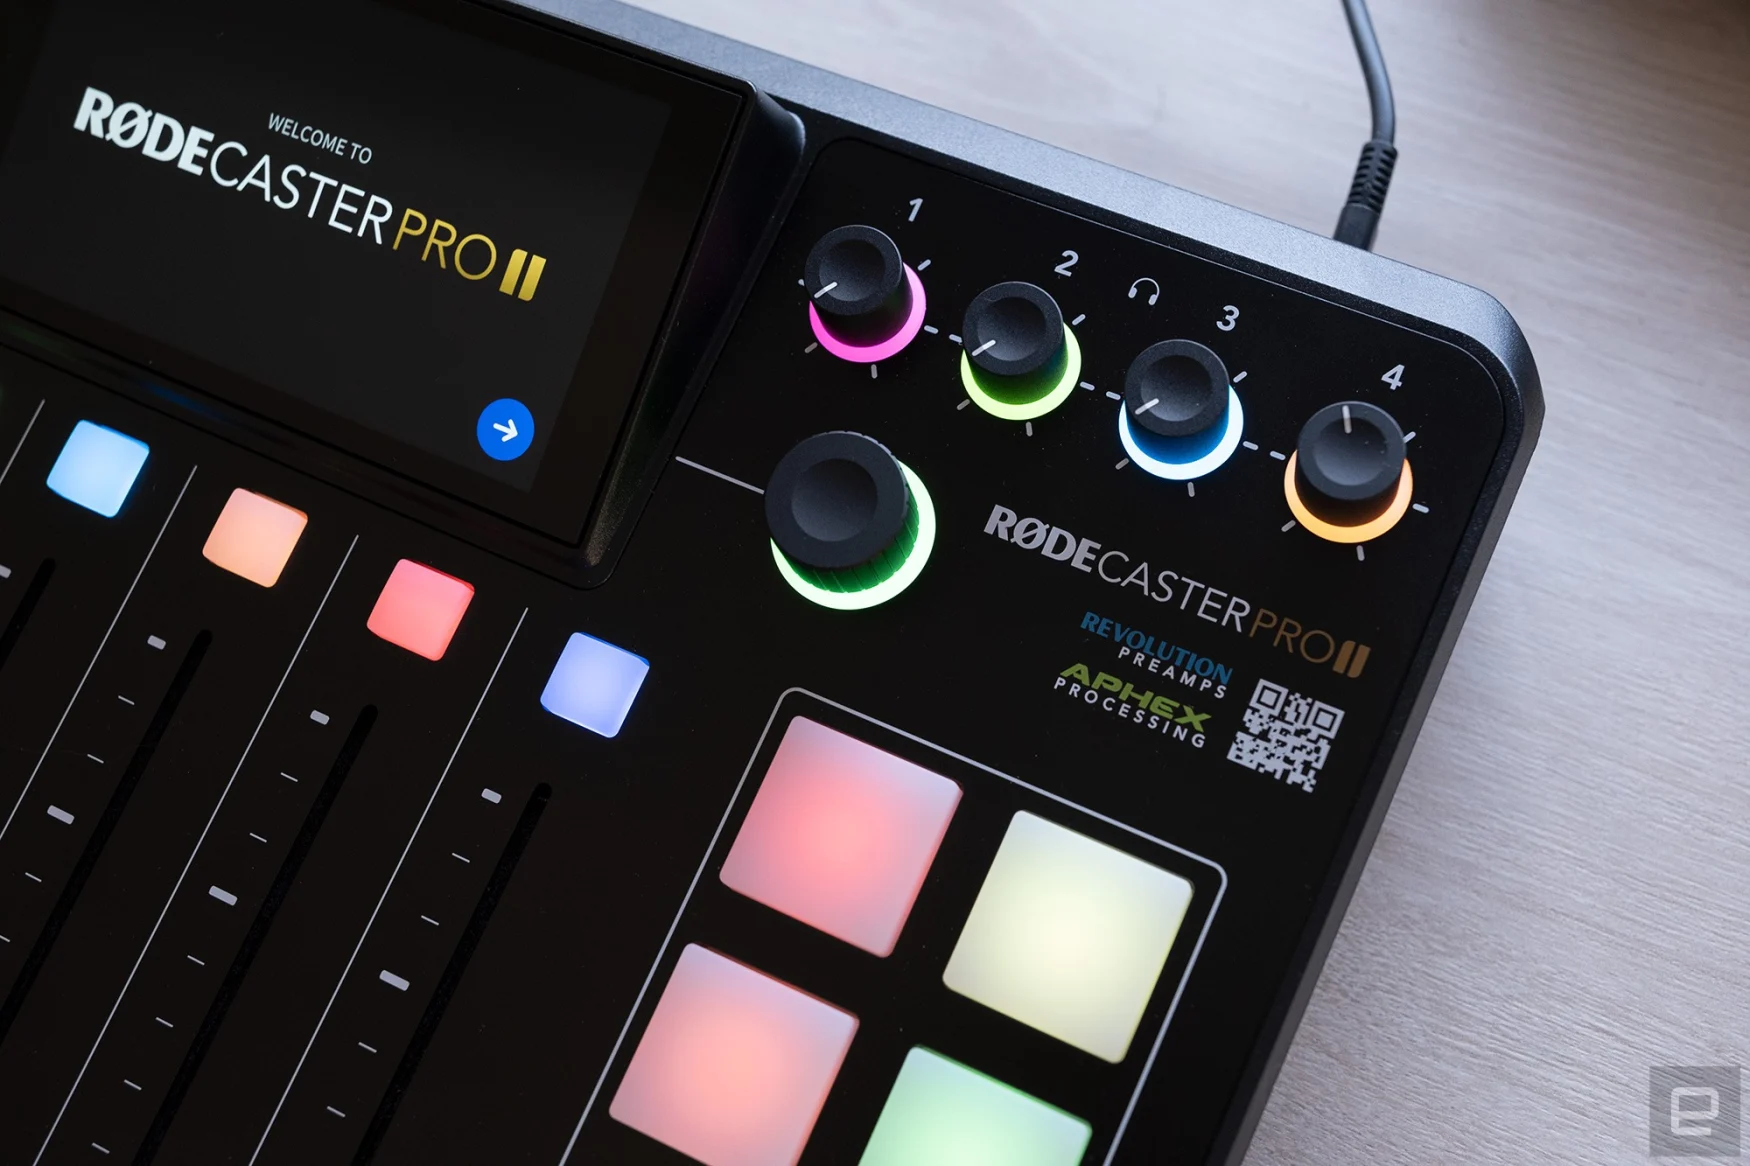 A close up of the top right corner of the Rodecaster Pro II where the headphone volume controls are shown with colored LEDs.